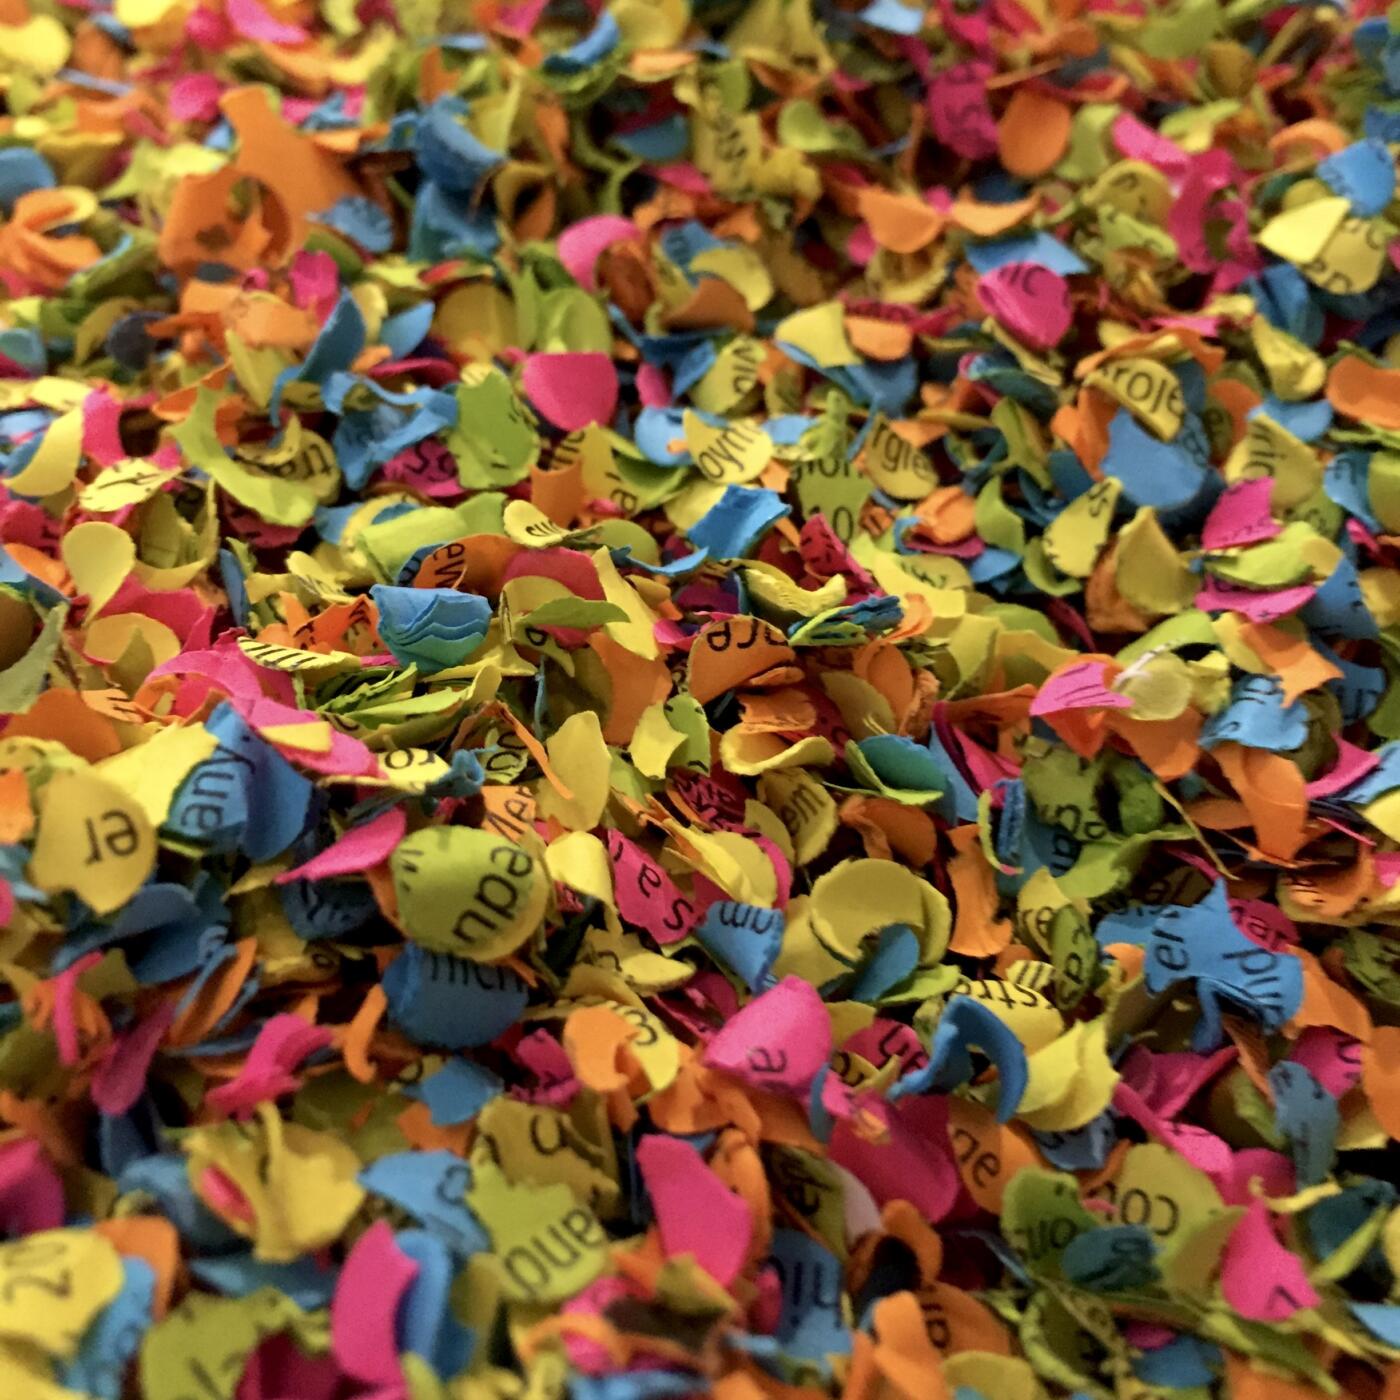 Brightly coloured shreds of paper with printed text fill the screan: the IPCC report has been turned into confetti.